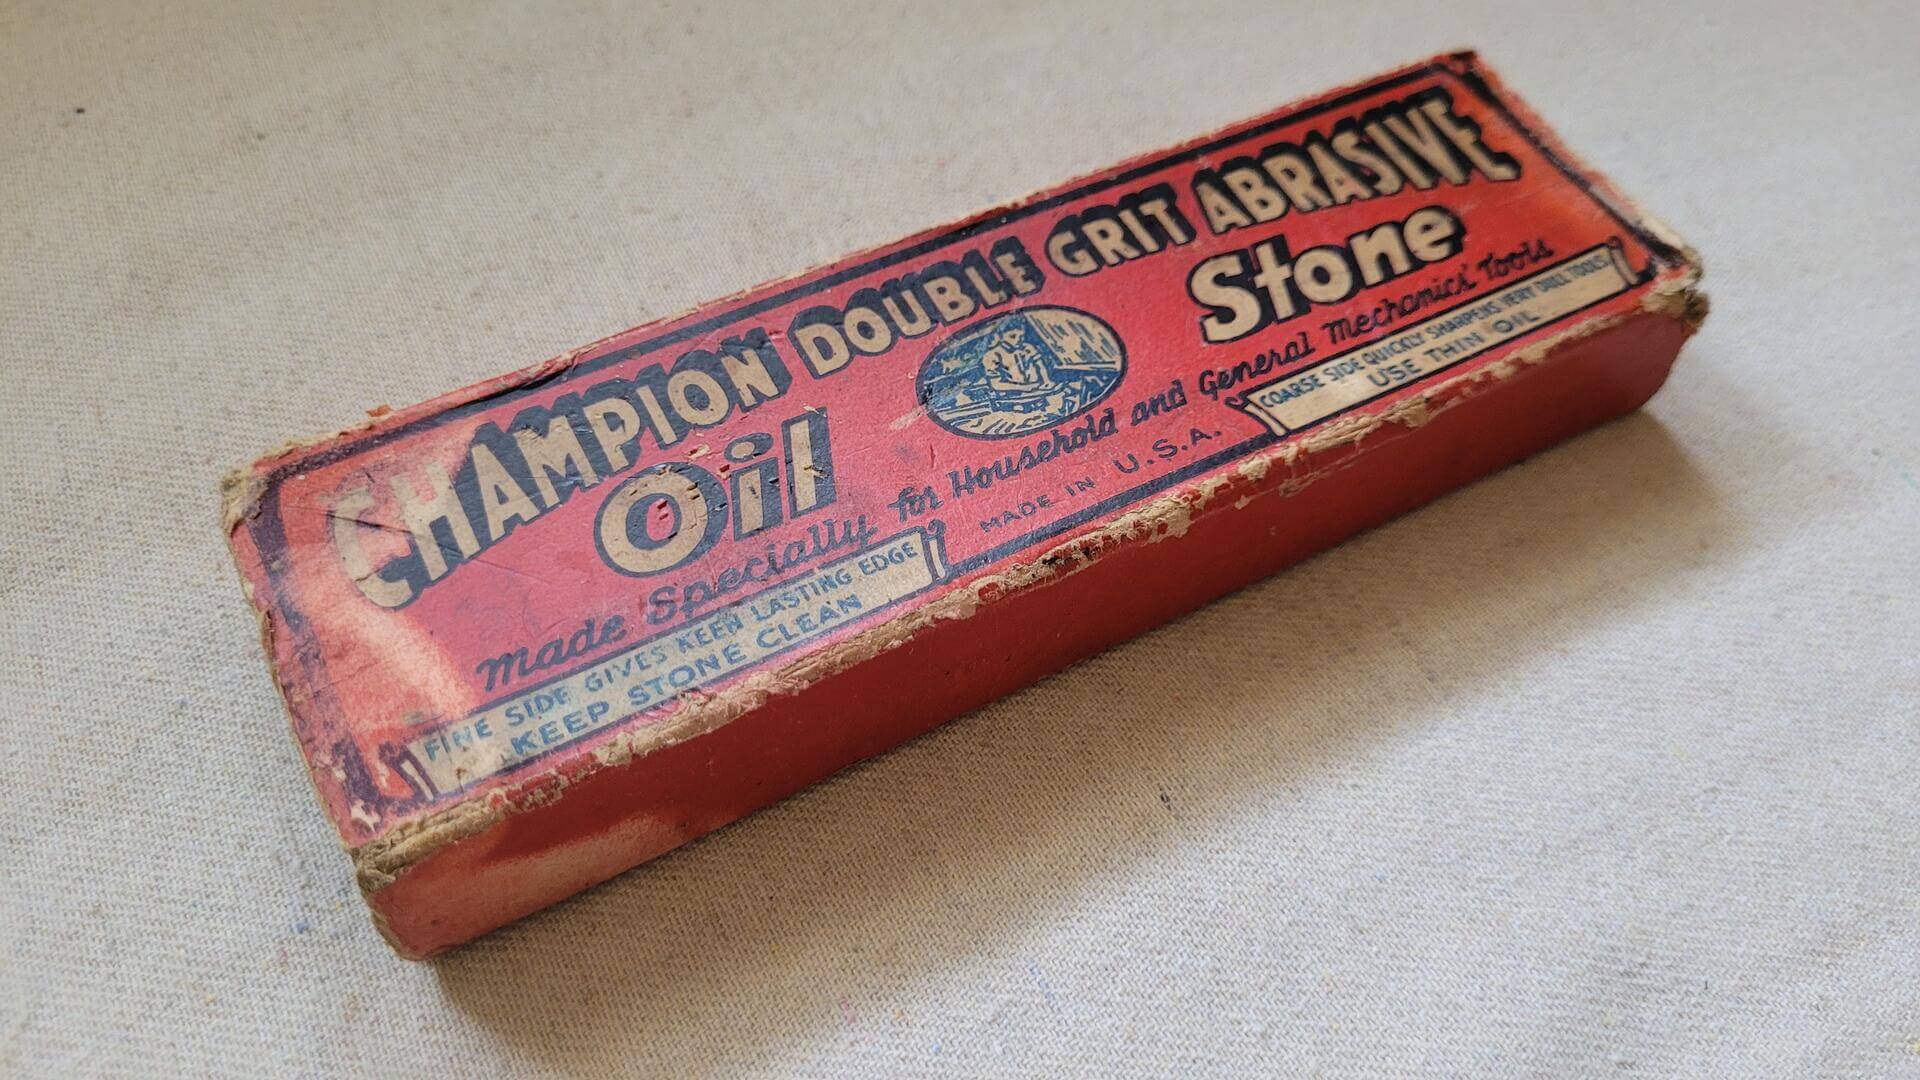 Vintage Champion Double Grit Abrasive Oil Sharpening Stone w Box - Antique made in USA collectible honing stone for knives, planes, and other hand tools